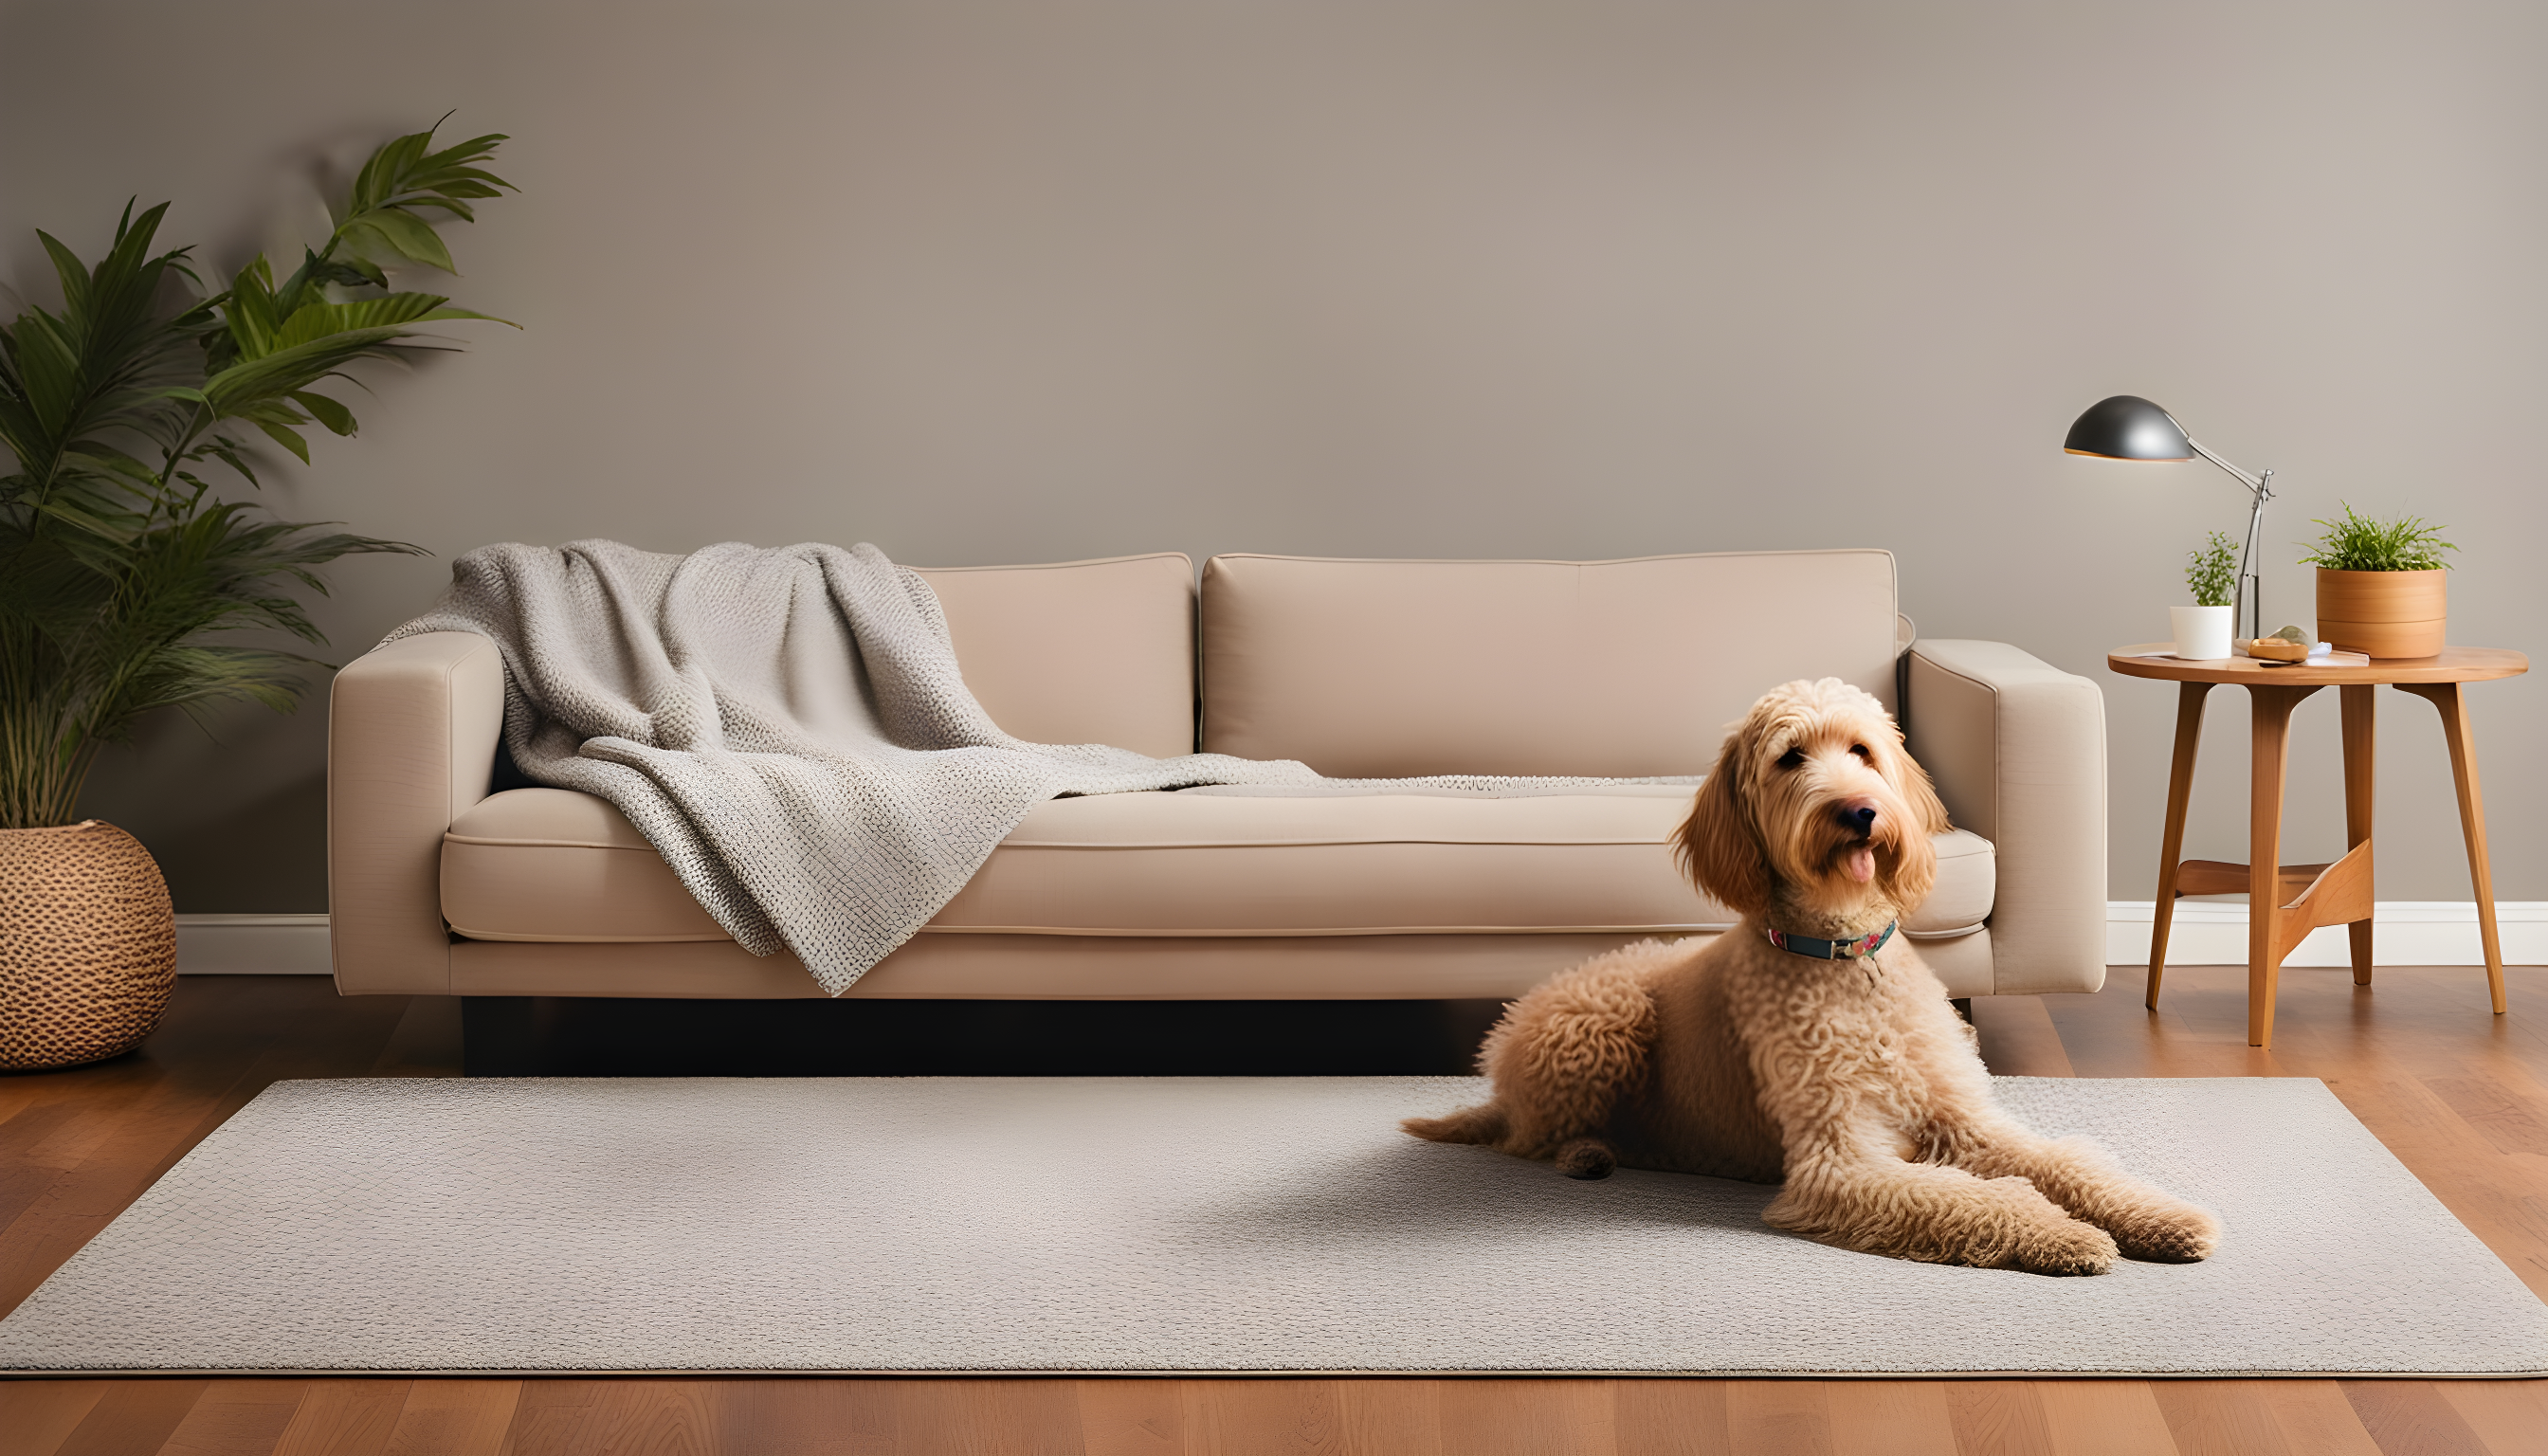 A living room setting showing a Labradoodle sitting on a blanket-covered couch, with a visible air purifier and hardwood flooring.